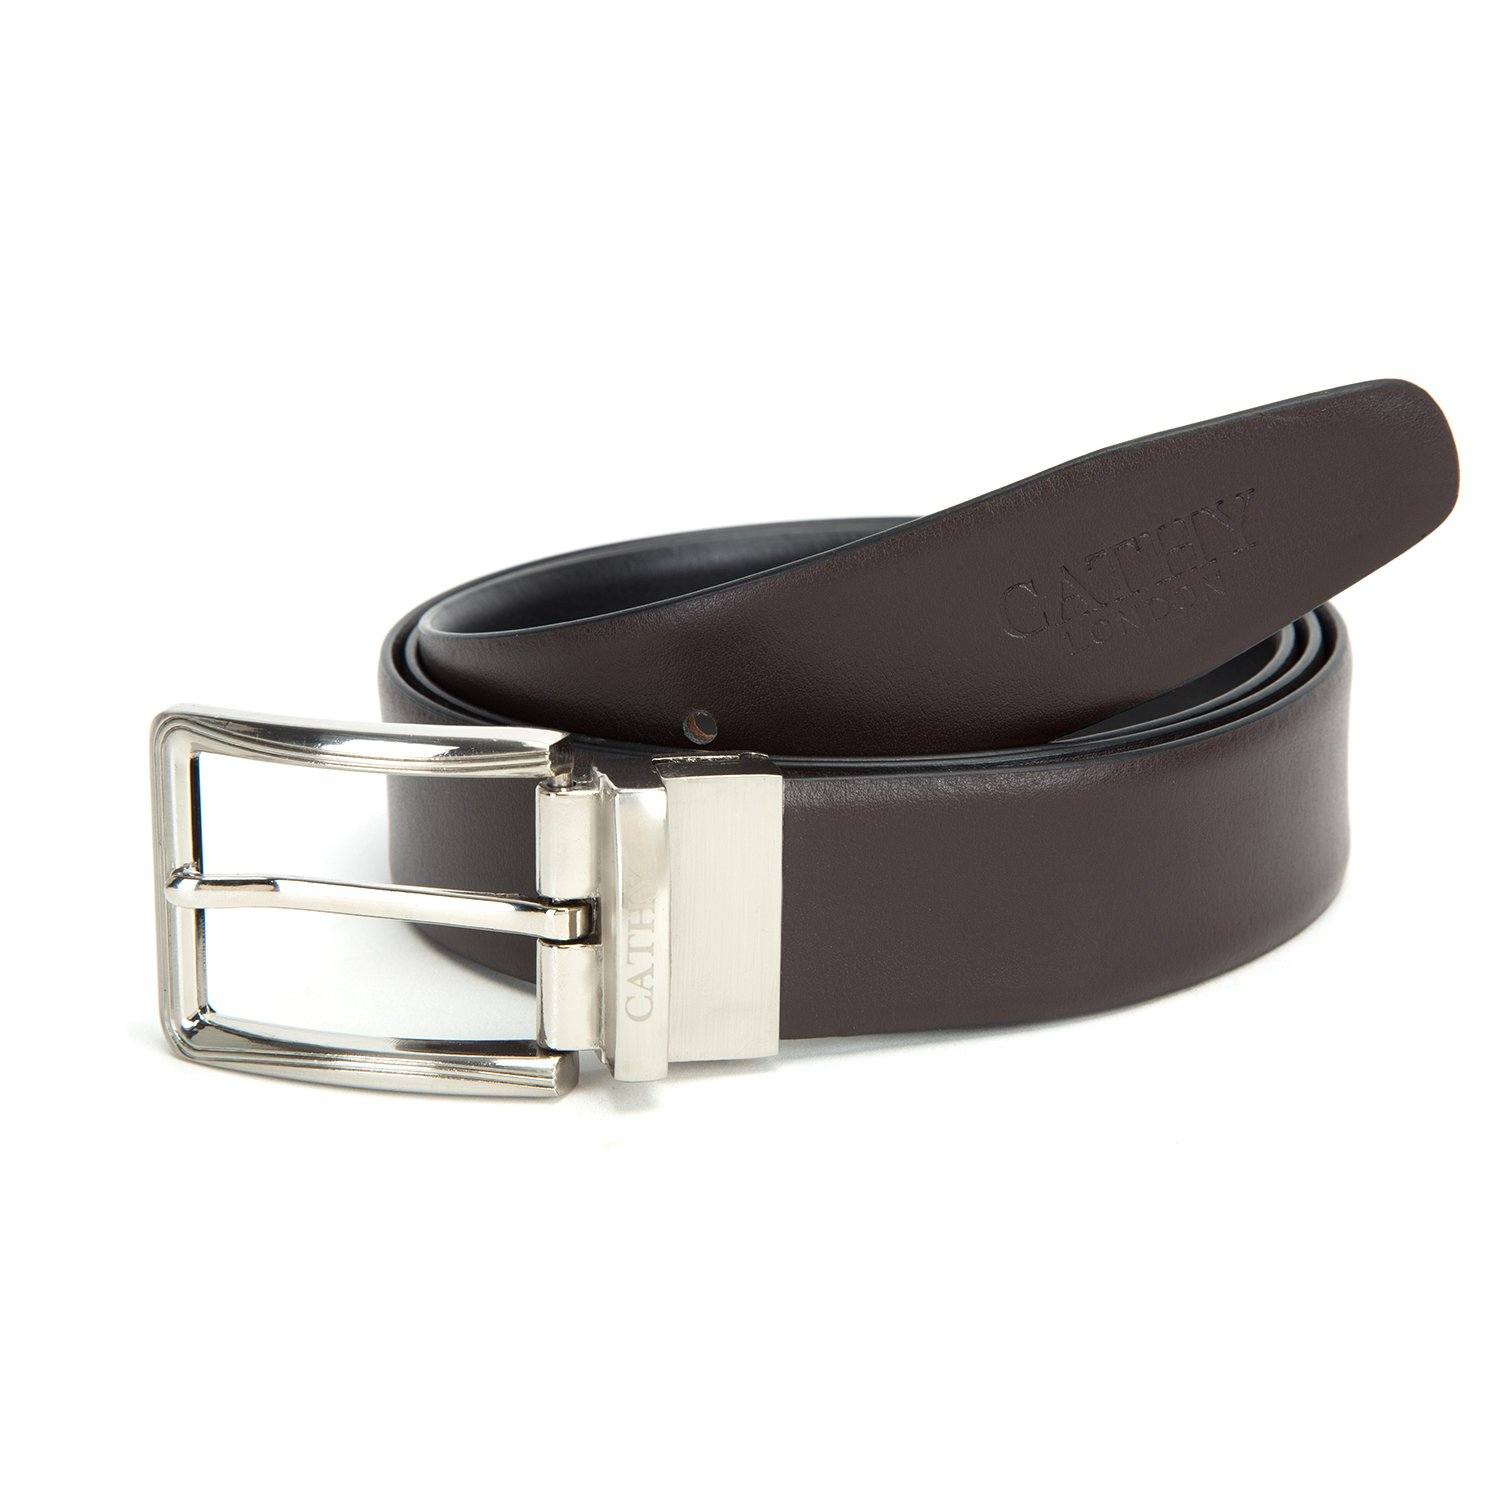 Men's Reversible Classic Dress Belt PU Leather Black & Brown with Rotating Silver Metal Buckle Cathy-London 